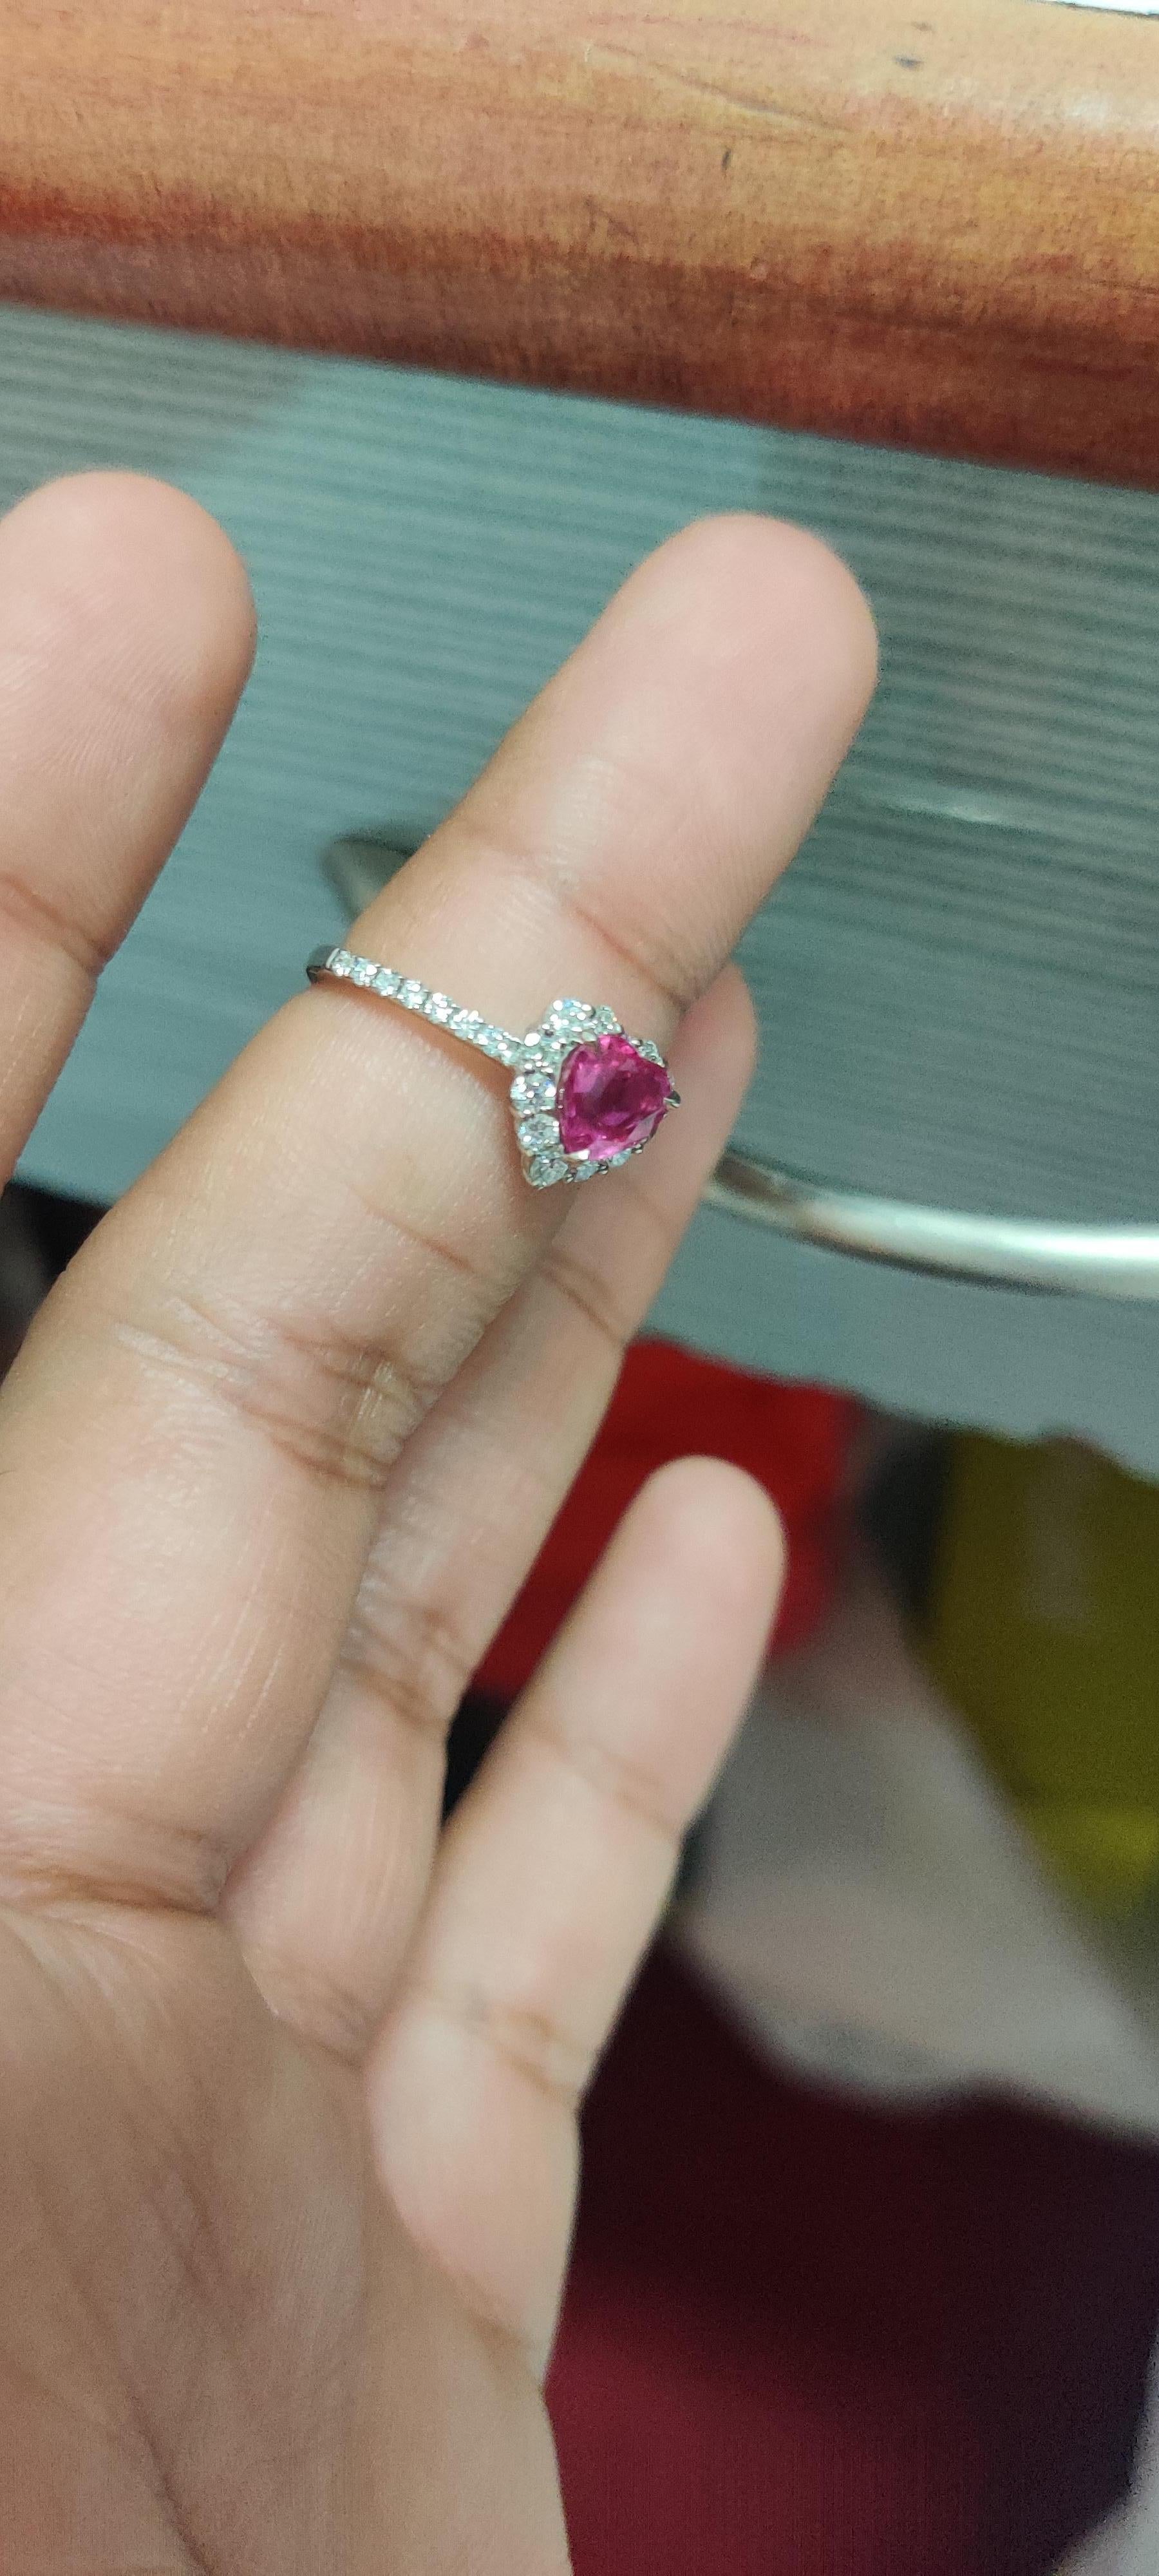 1.23 Carat Heart Shaped Ruby Ring in Platinum 900 For Sale 2